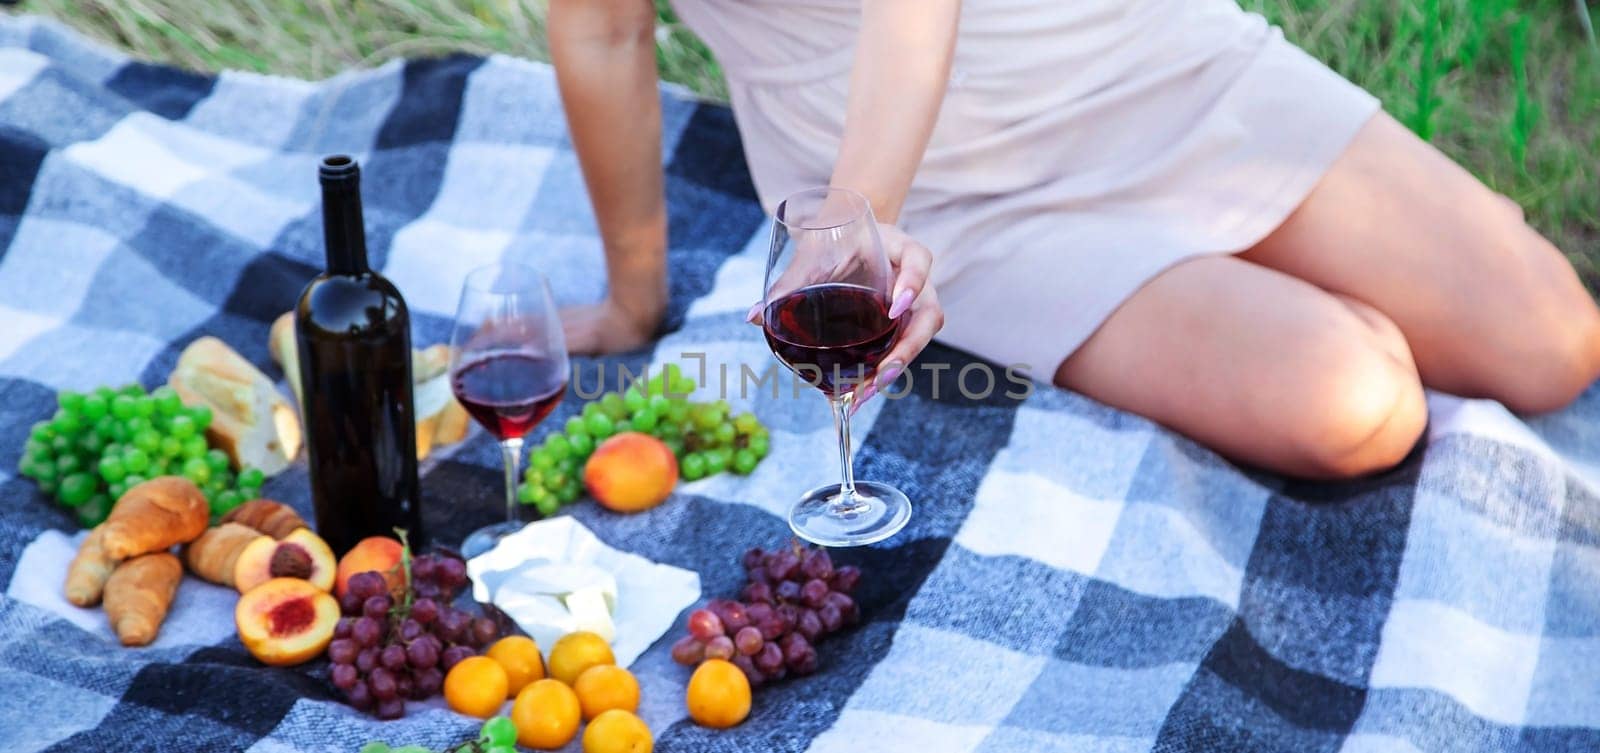 picnic in nature, girl pouring wine, couple in love. nature. selective focus